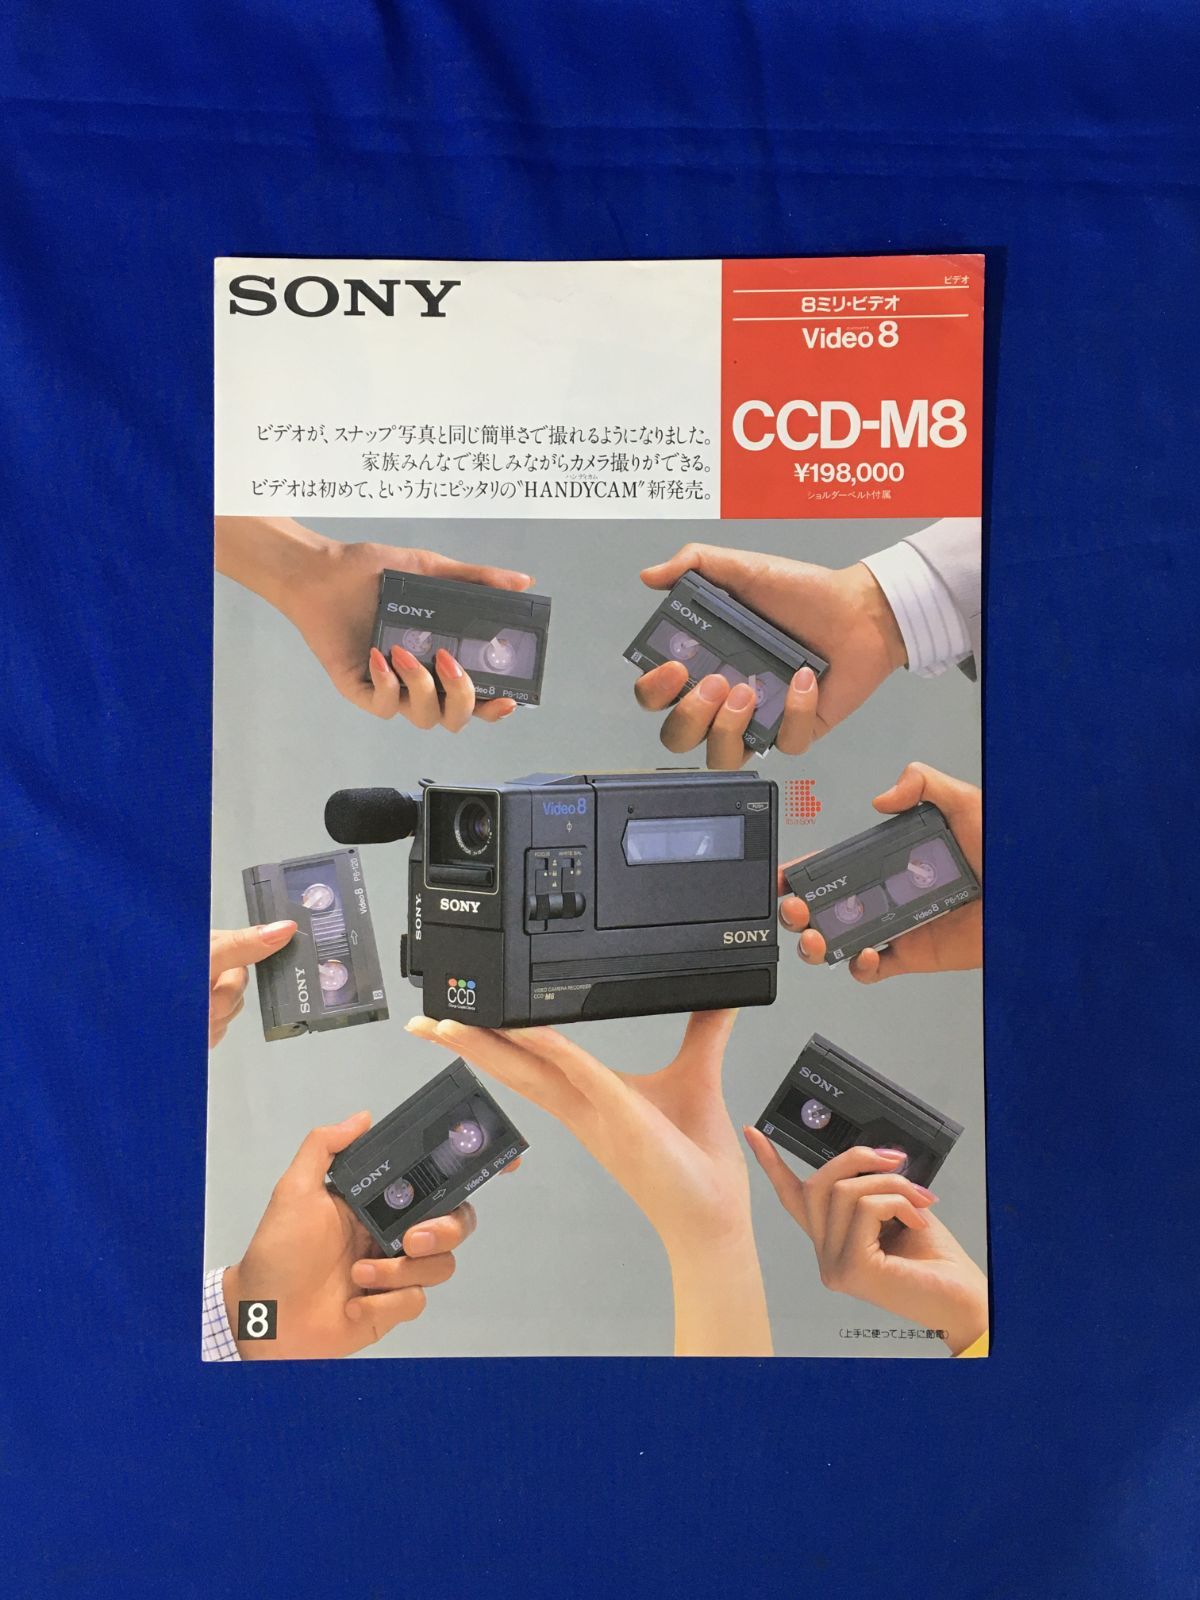 A1397イ○【カタログ】 「SONY Video8 CCD-M8」 ソニー 1985年9月 8